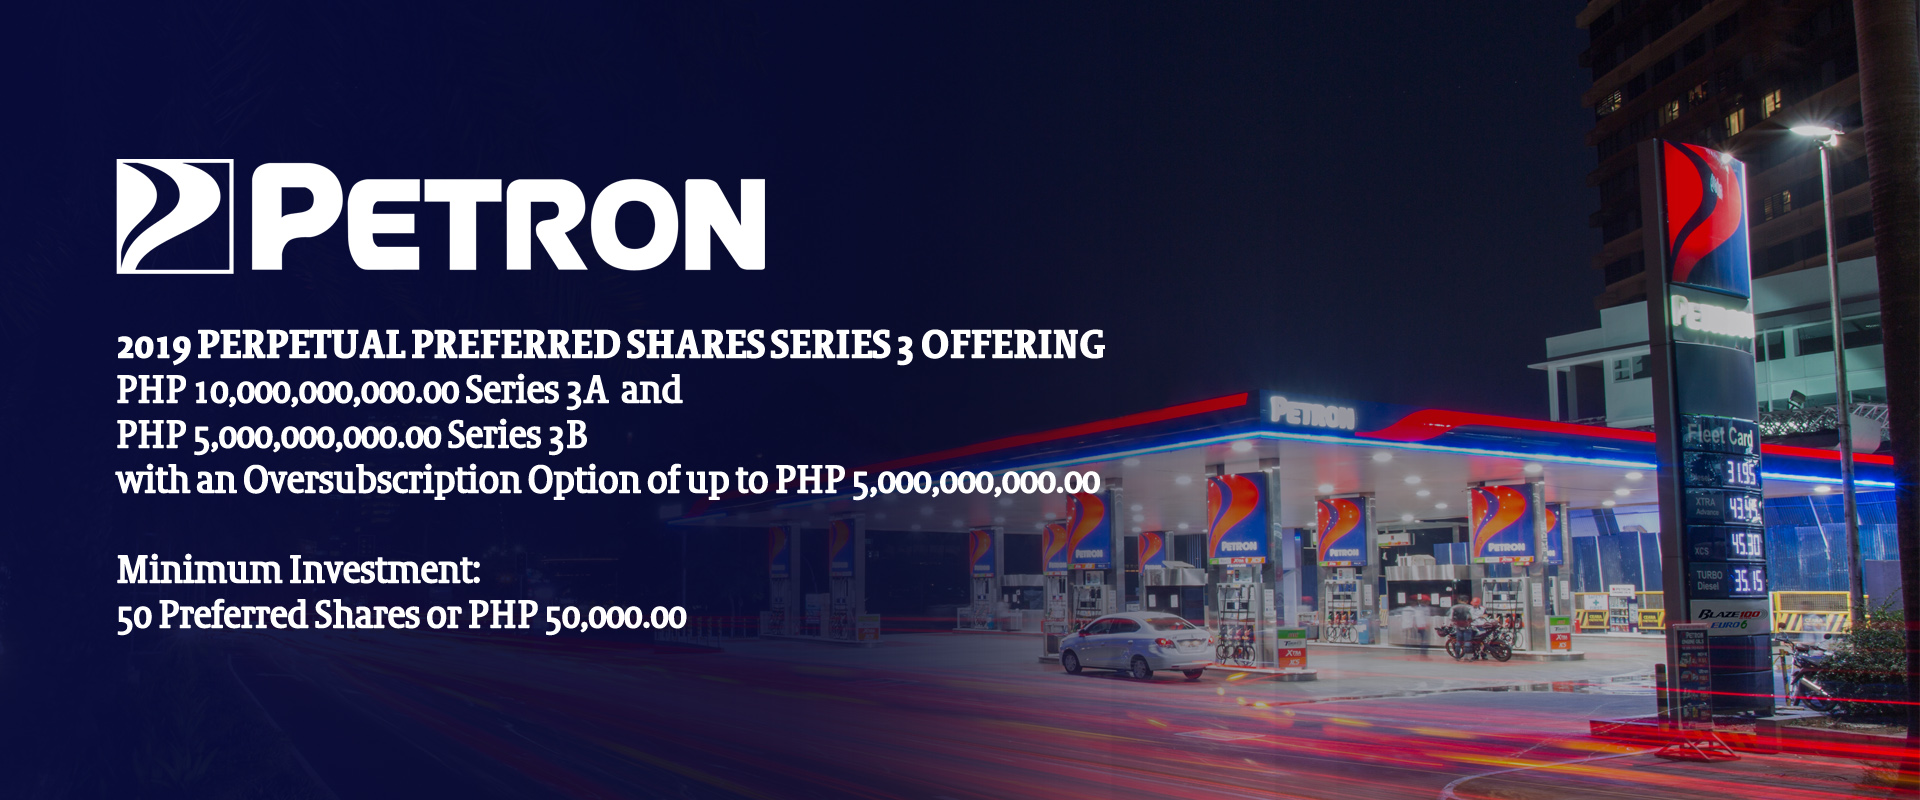 Petron 2019 Perpetual Preferred Shares Series 3 Offering